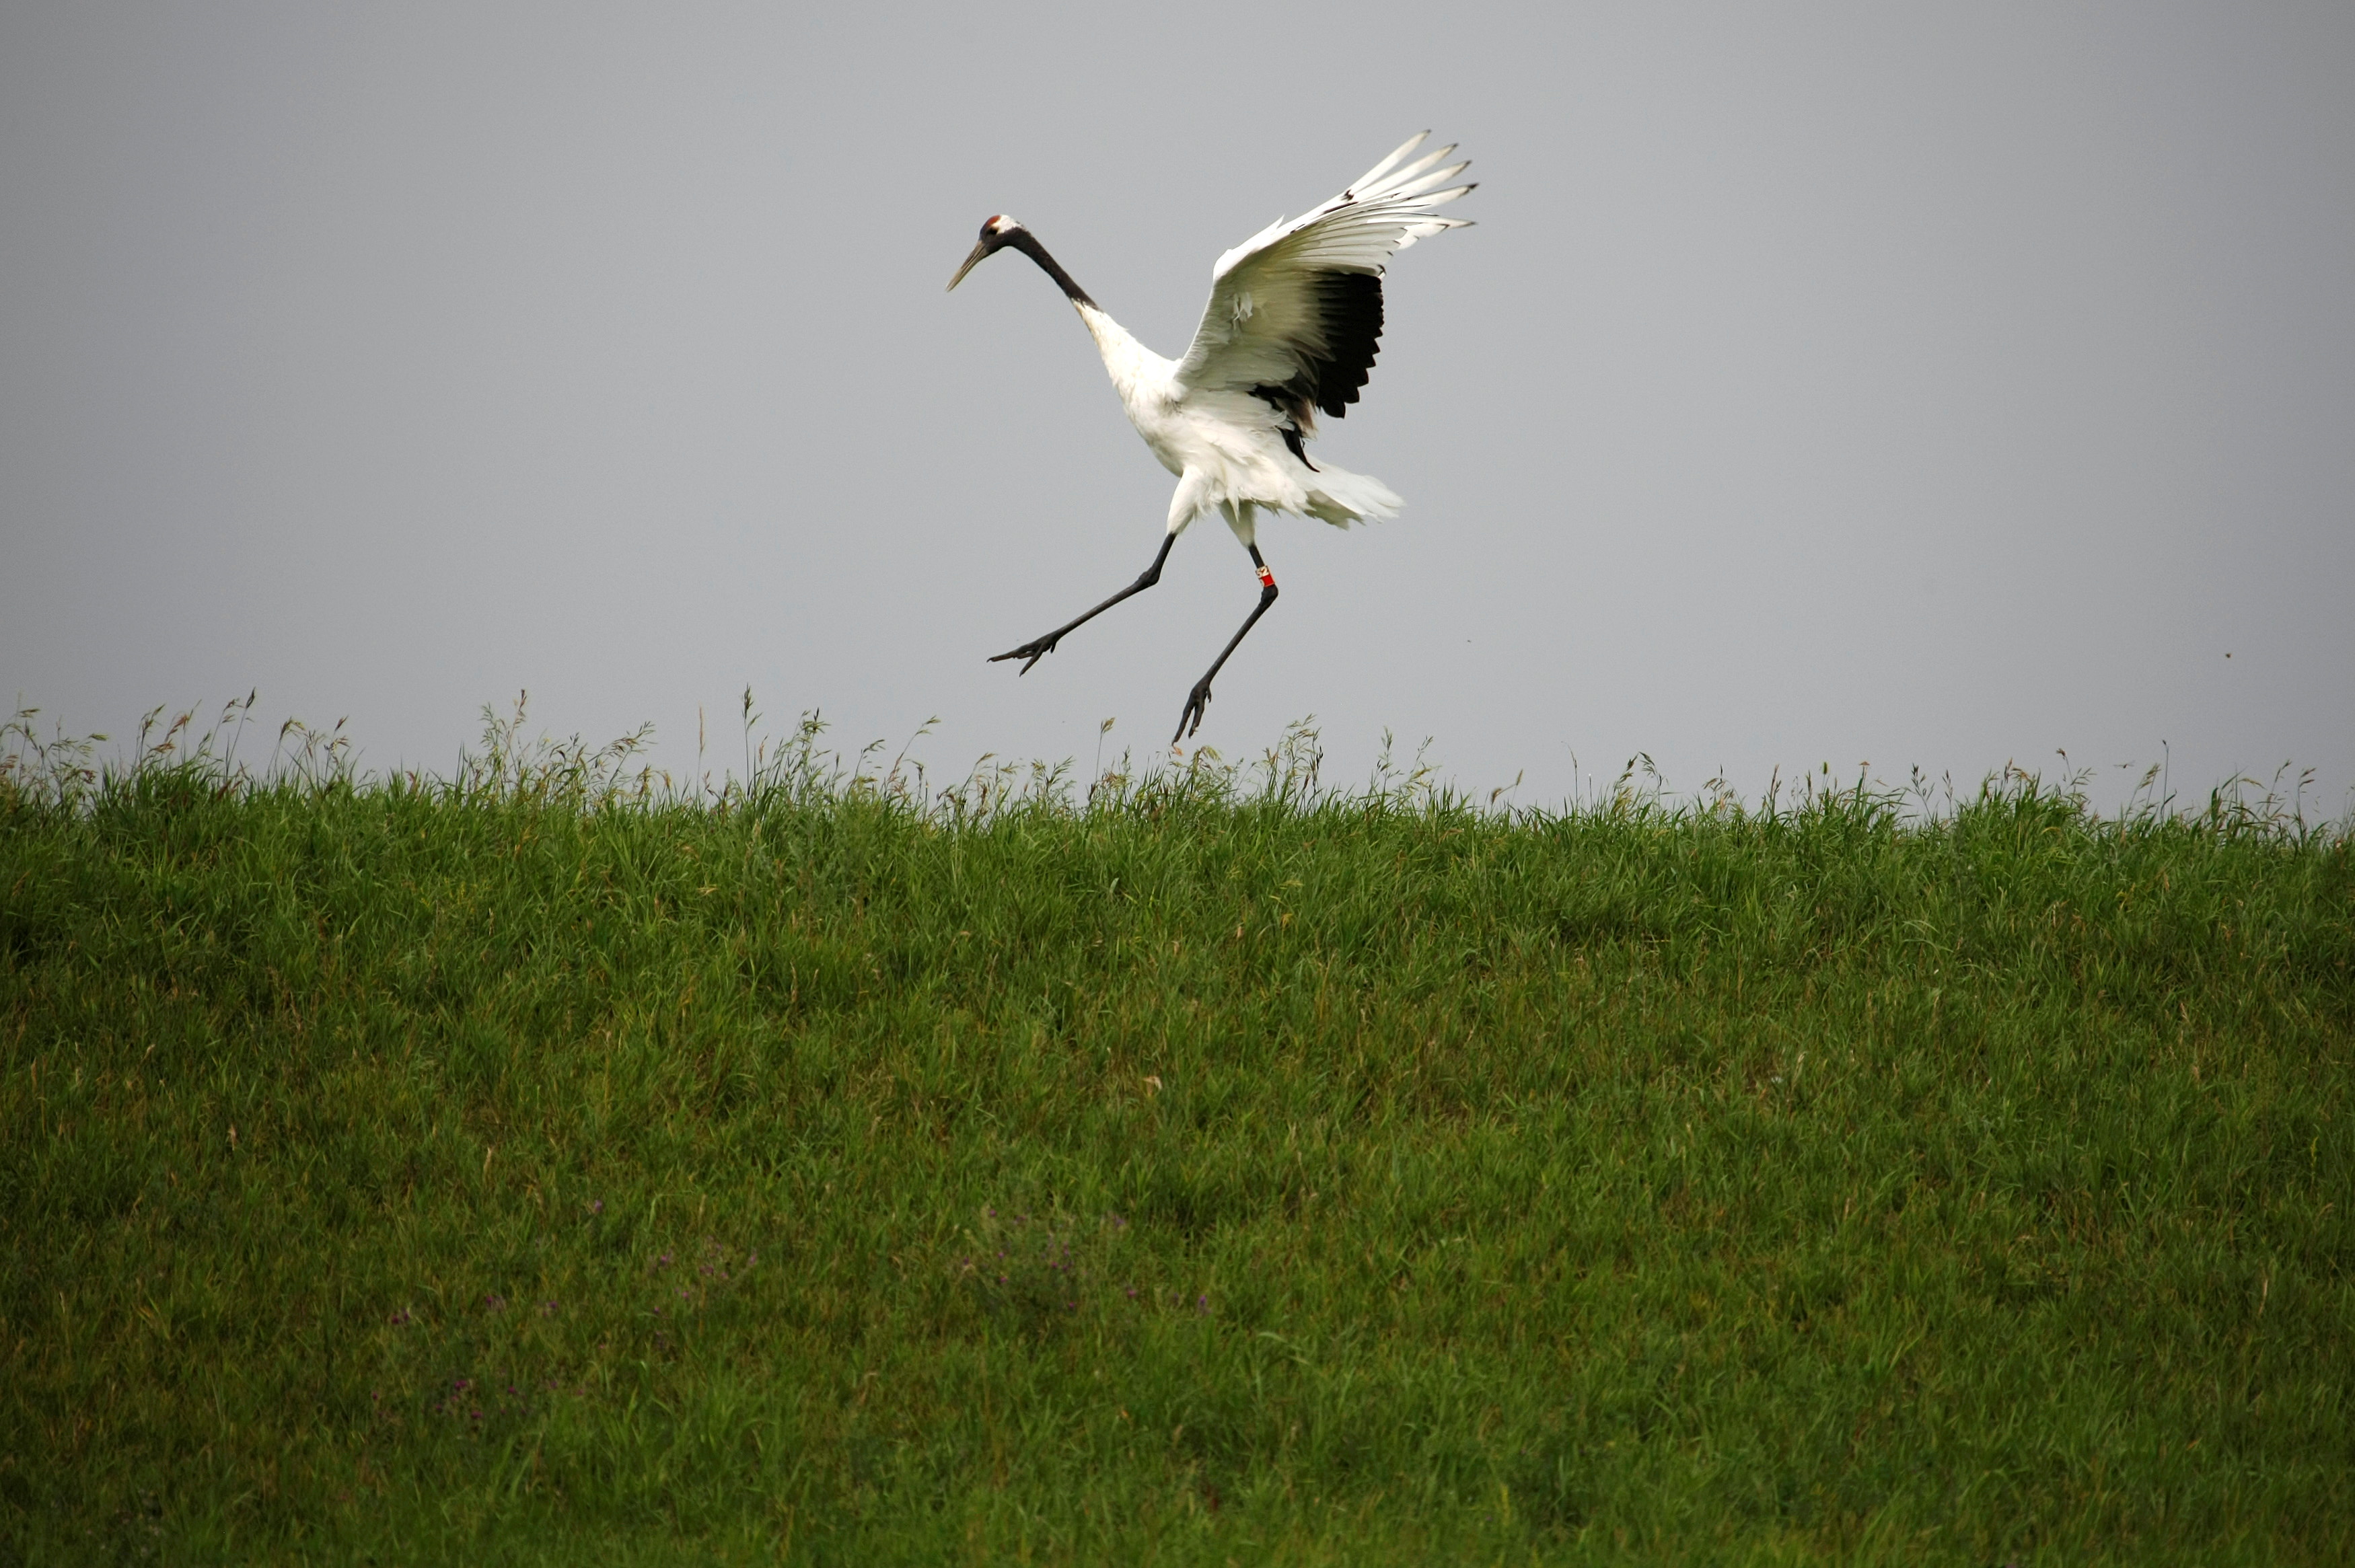 A red-crowned crane spreads its wings in Zhalong Nature Reserve, in Heilongjiang province